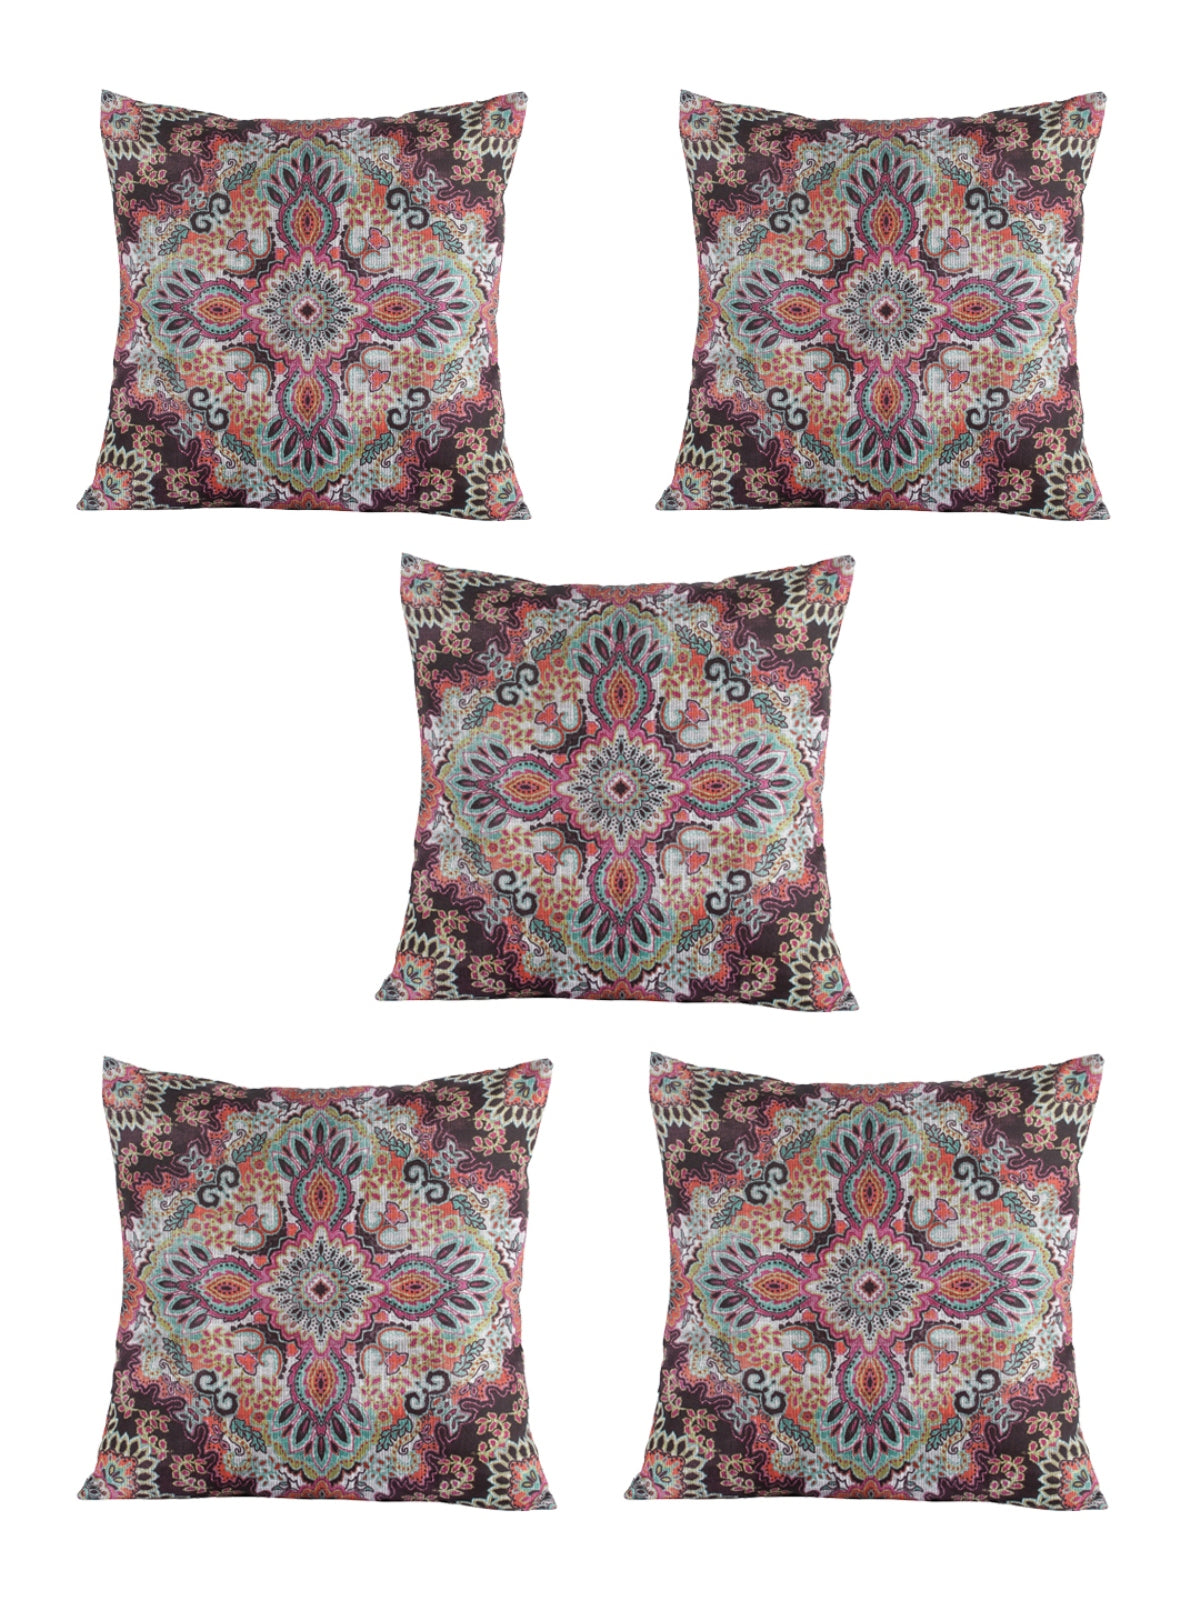 Ethnic Motifs Polyester Cushion Cover 16x16 Inch, Set of 5 - Multi